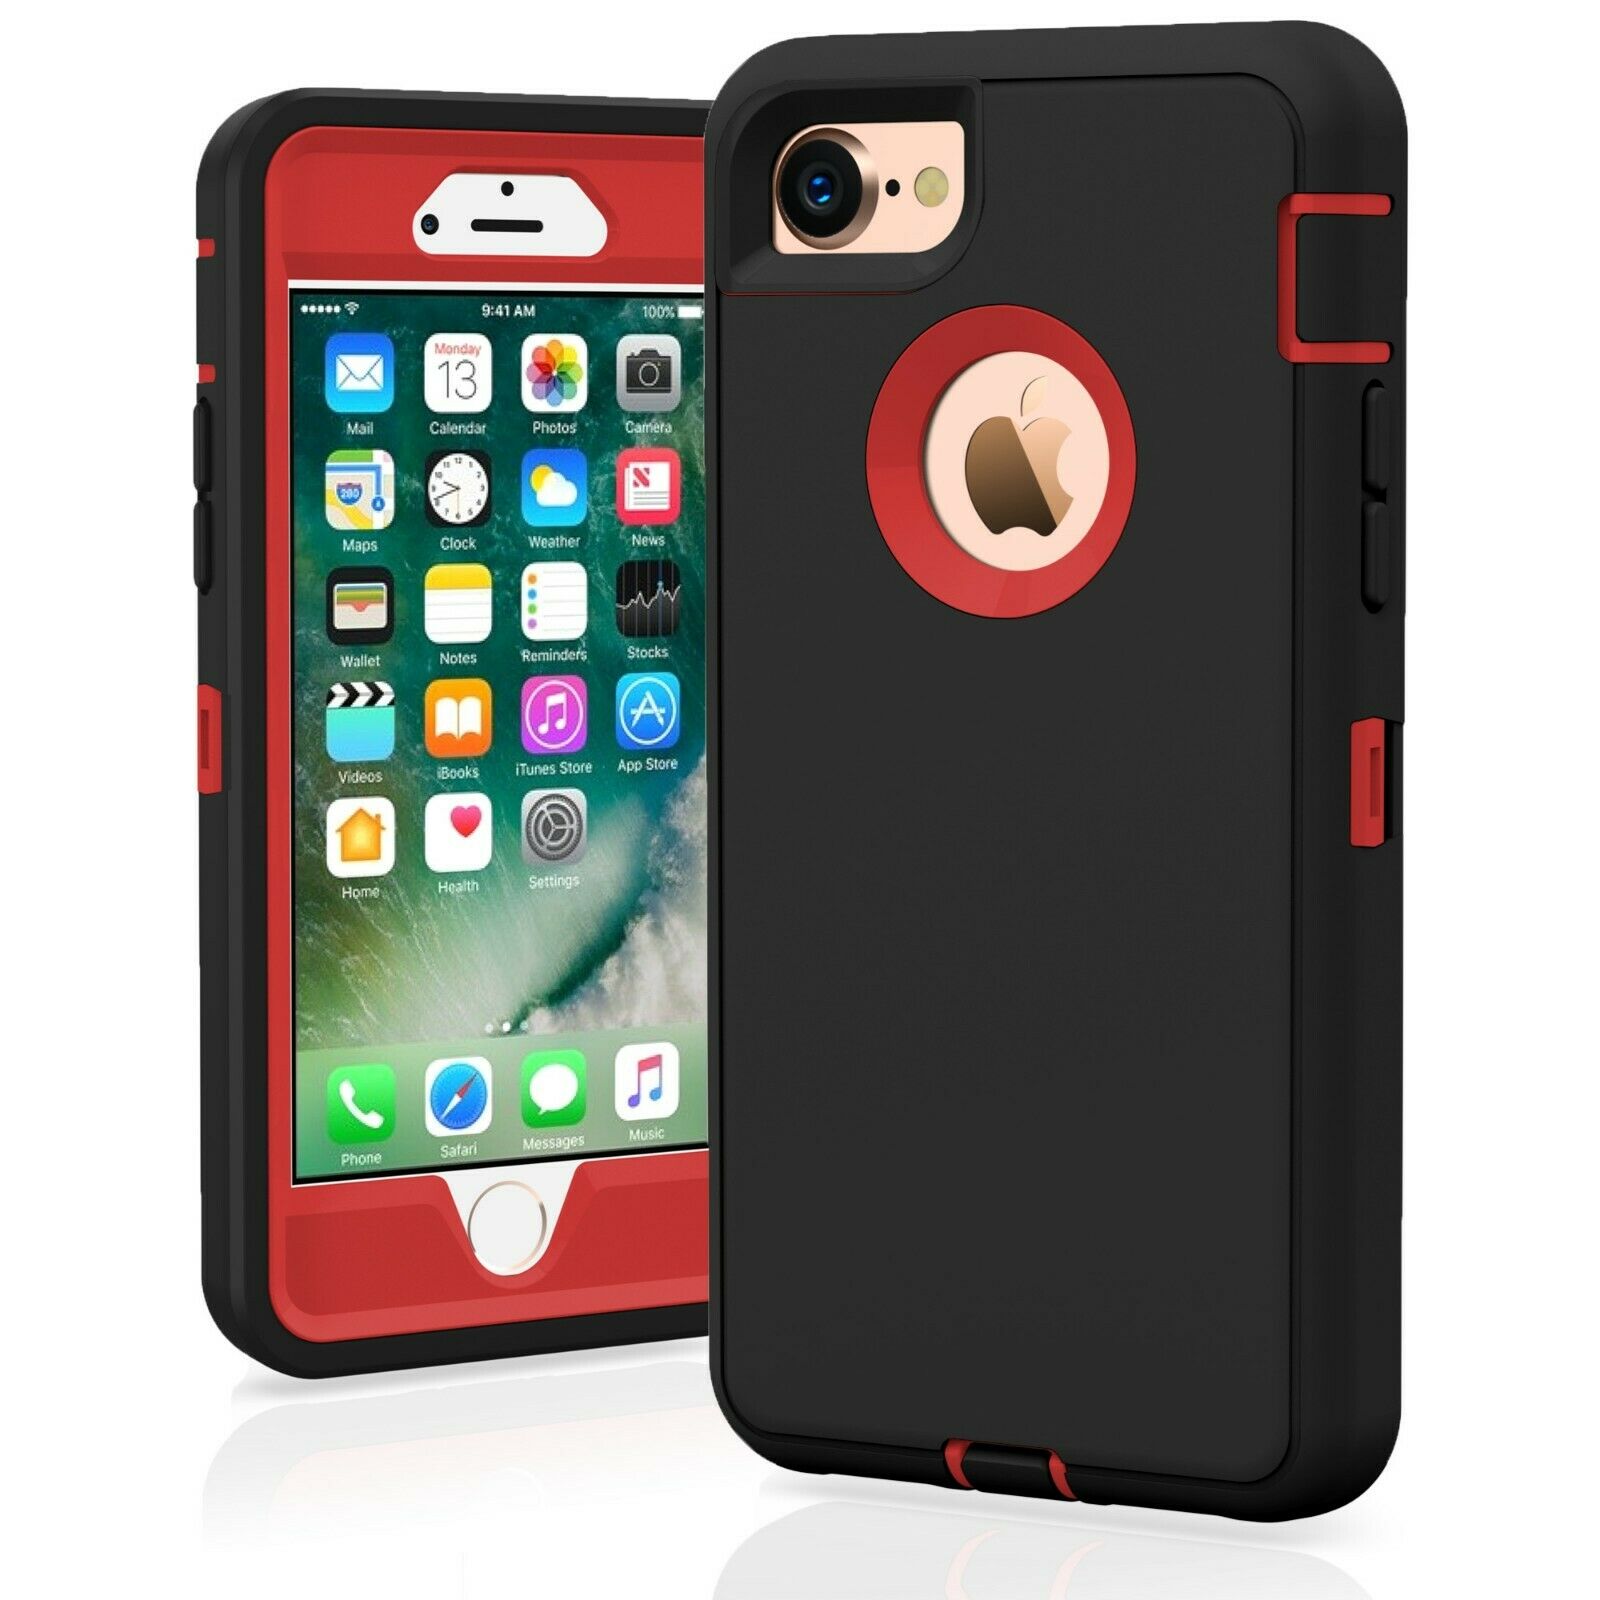 For iPhone 7 / 7 Plus 8 / 8 Plus Case Cover Protective Hybrid Rugged Shockproof alphaaccessmobile For iPhone 7 BLACK RED 